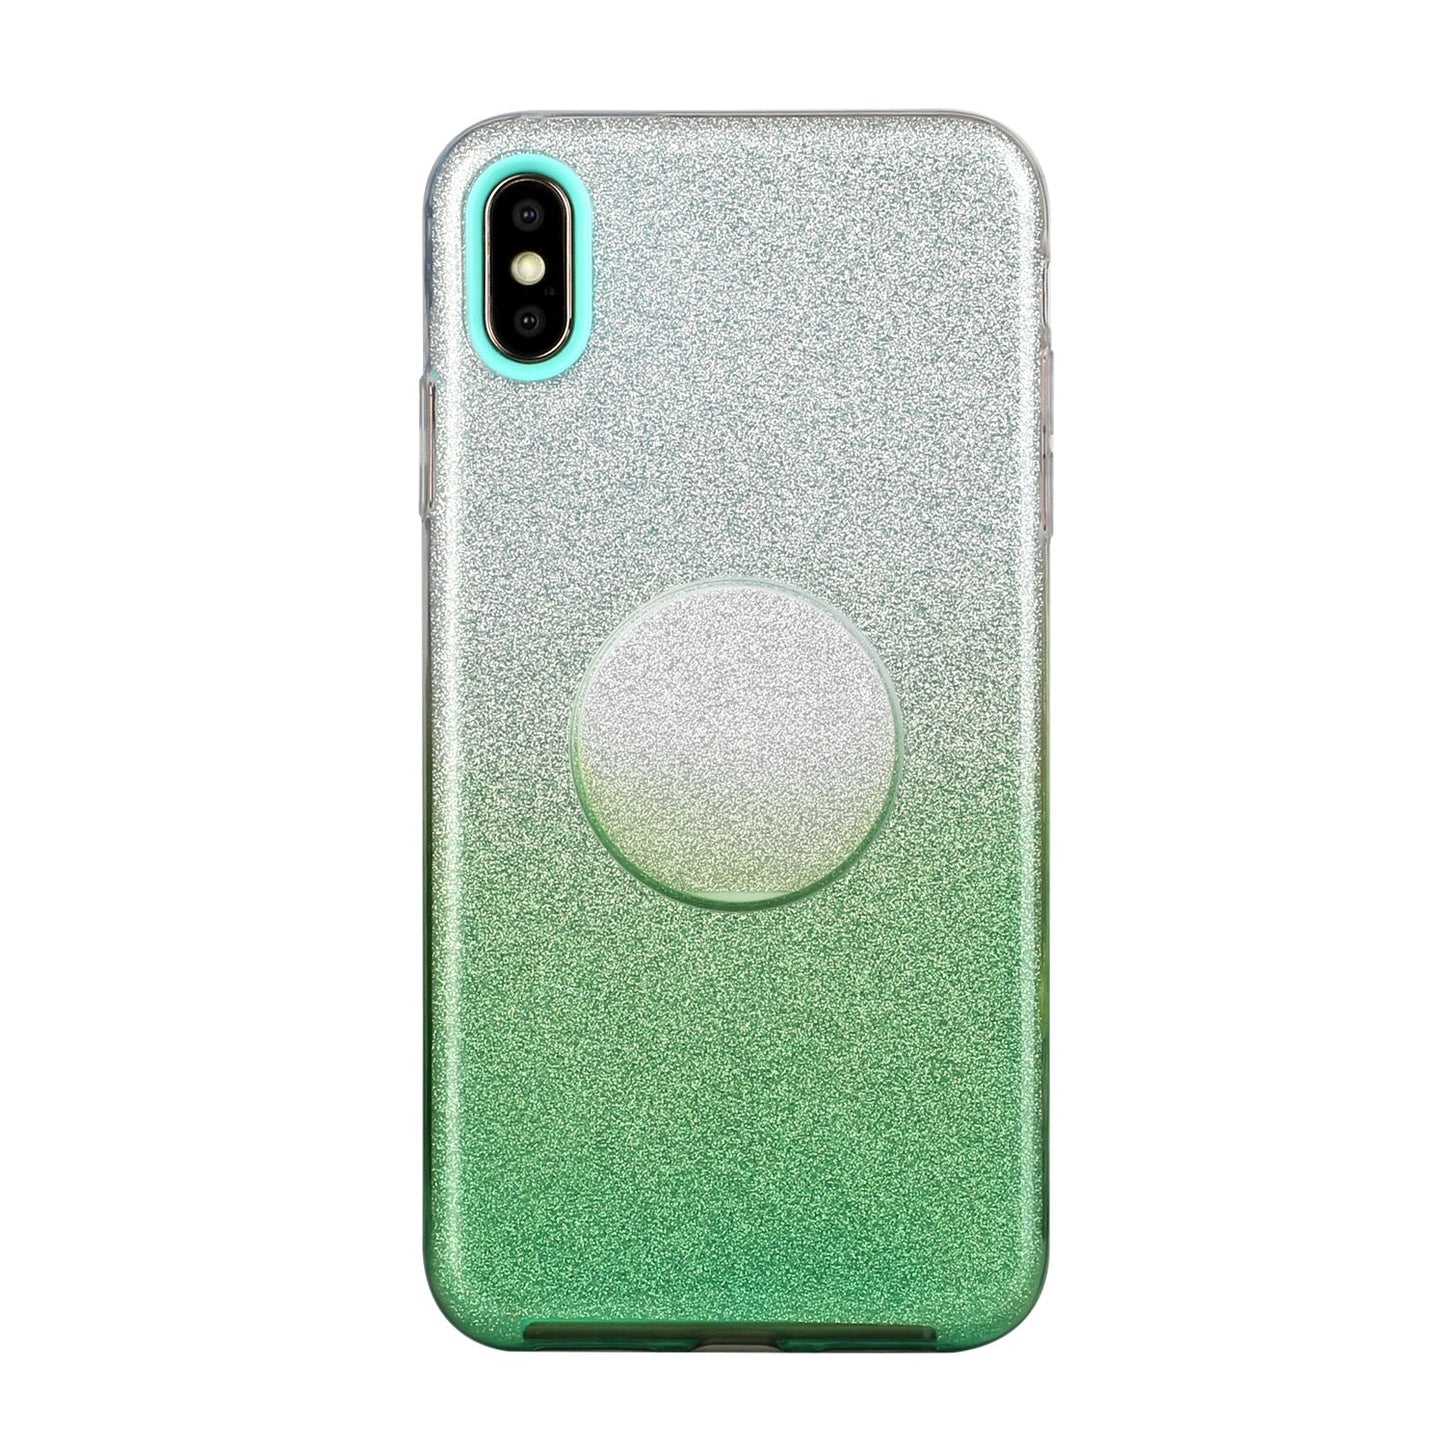 For iphone X/XS/XR/XS MAX/11/11 pro MAX Phone Case Gradient Color Glitter Powder Phone Cover with Airbag Bracket green ZopiStyle